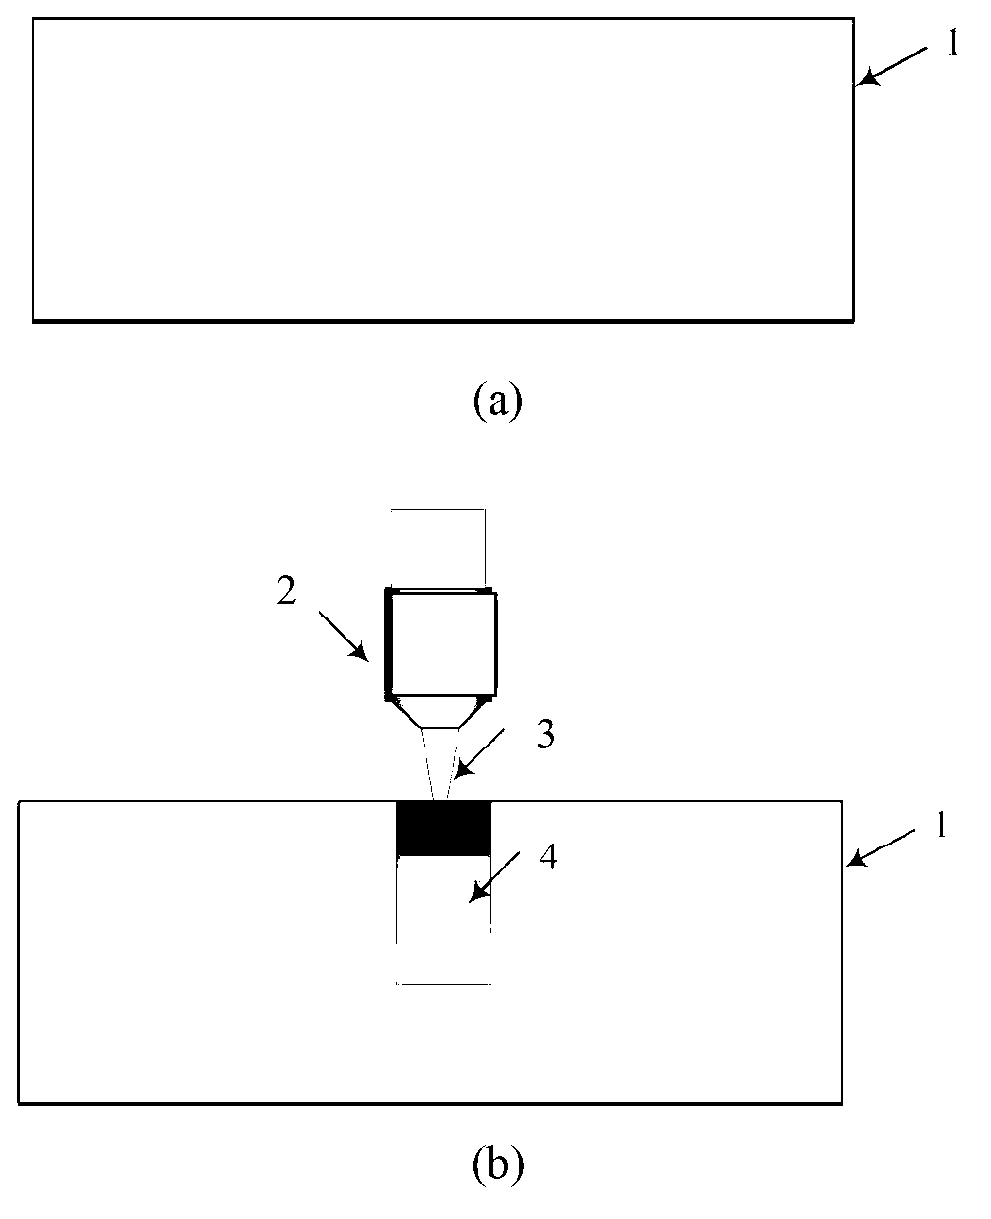 Silicon microstructure processing method based on femtosecond laser treatment and wet etching